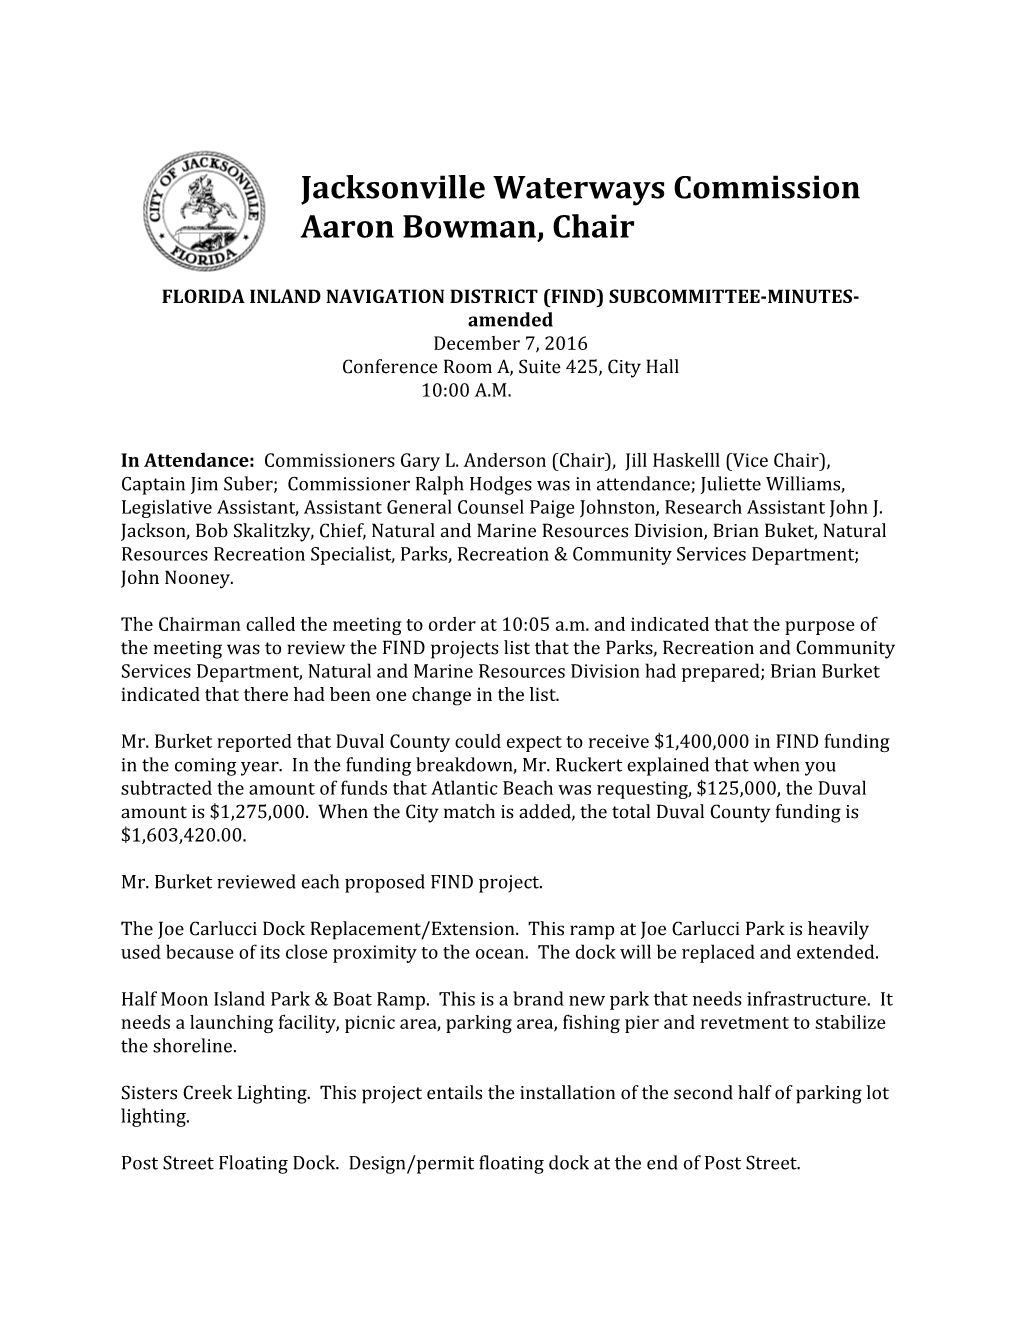 FLORIDA INLAND NAVIGATION DISTRICT (FIND) SUBCOMMITTEE-MINUTES-Amended